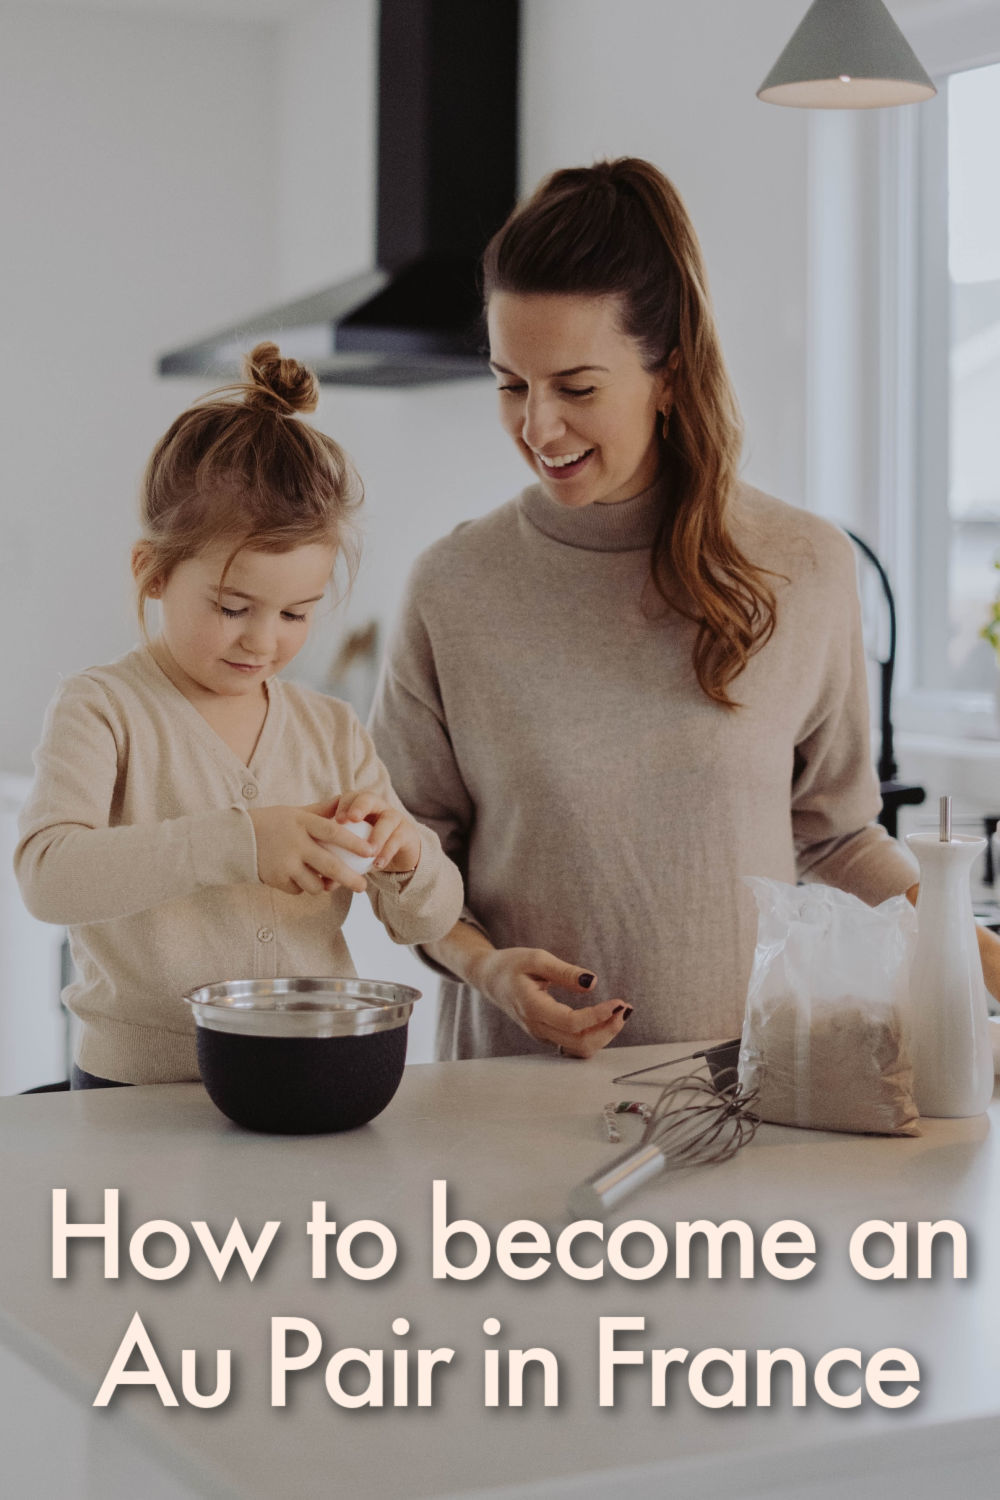 Au pairing in France is basically the most immersive way to explore the country's culture, and bonus, you get paid to do it! Living with a French family and looking after their children while they work means that you don’t have to worry about accommodation and food costs.All you need to know about becoming an au pair in France is in this guide. Requirements, jobs, how to apply, and a trustworthy agency.